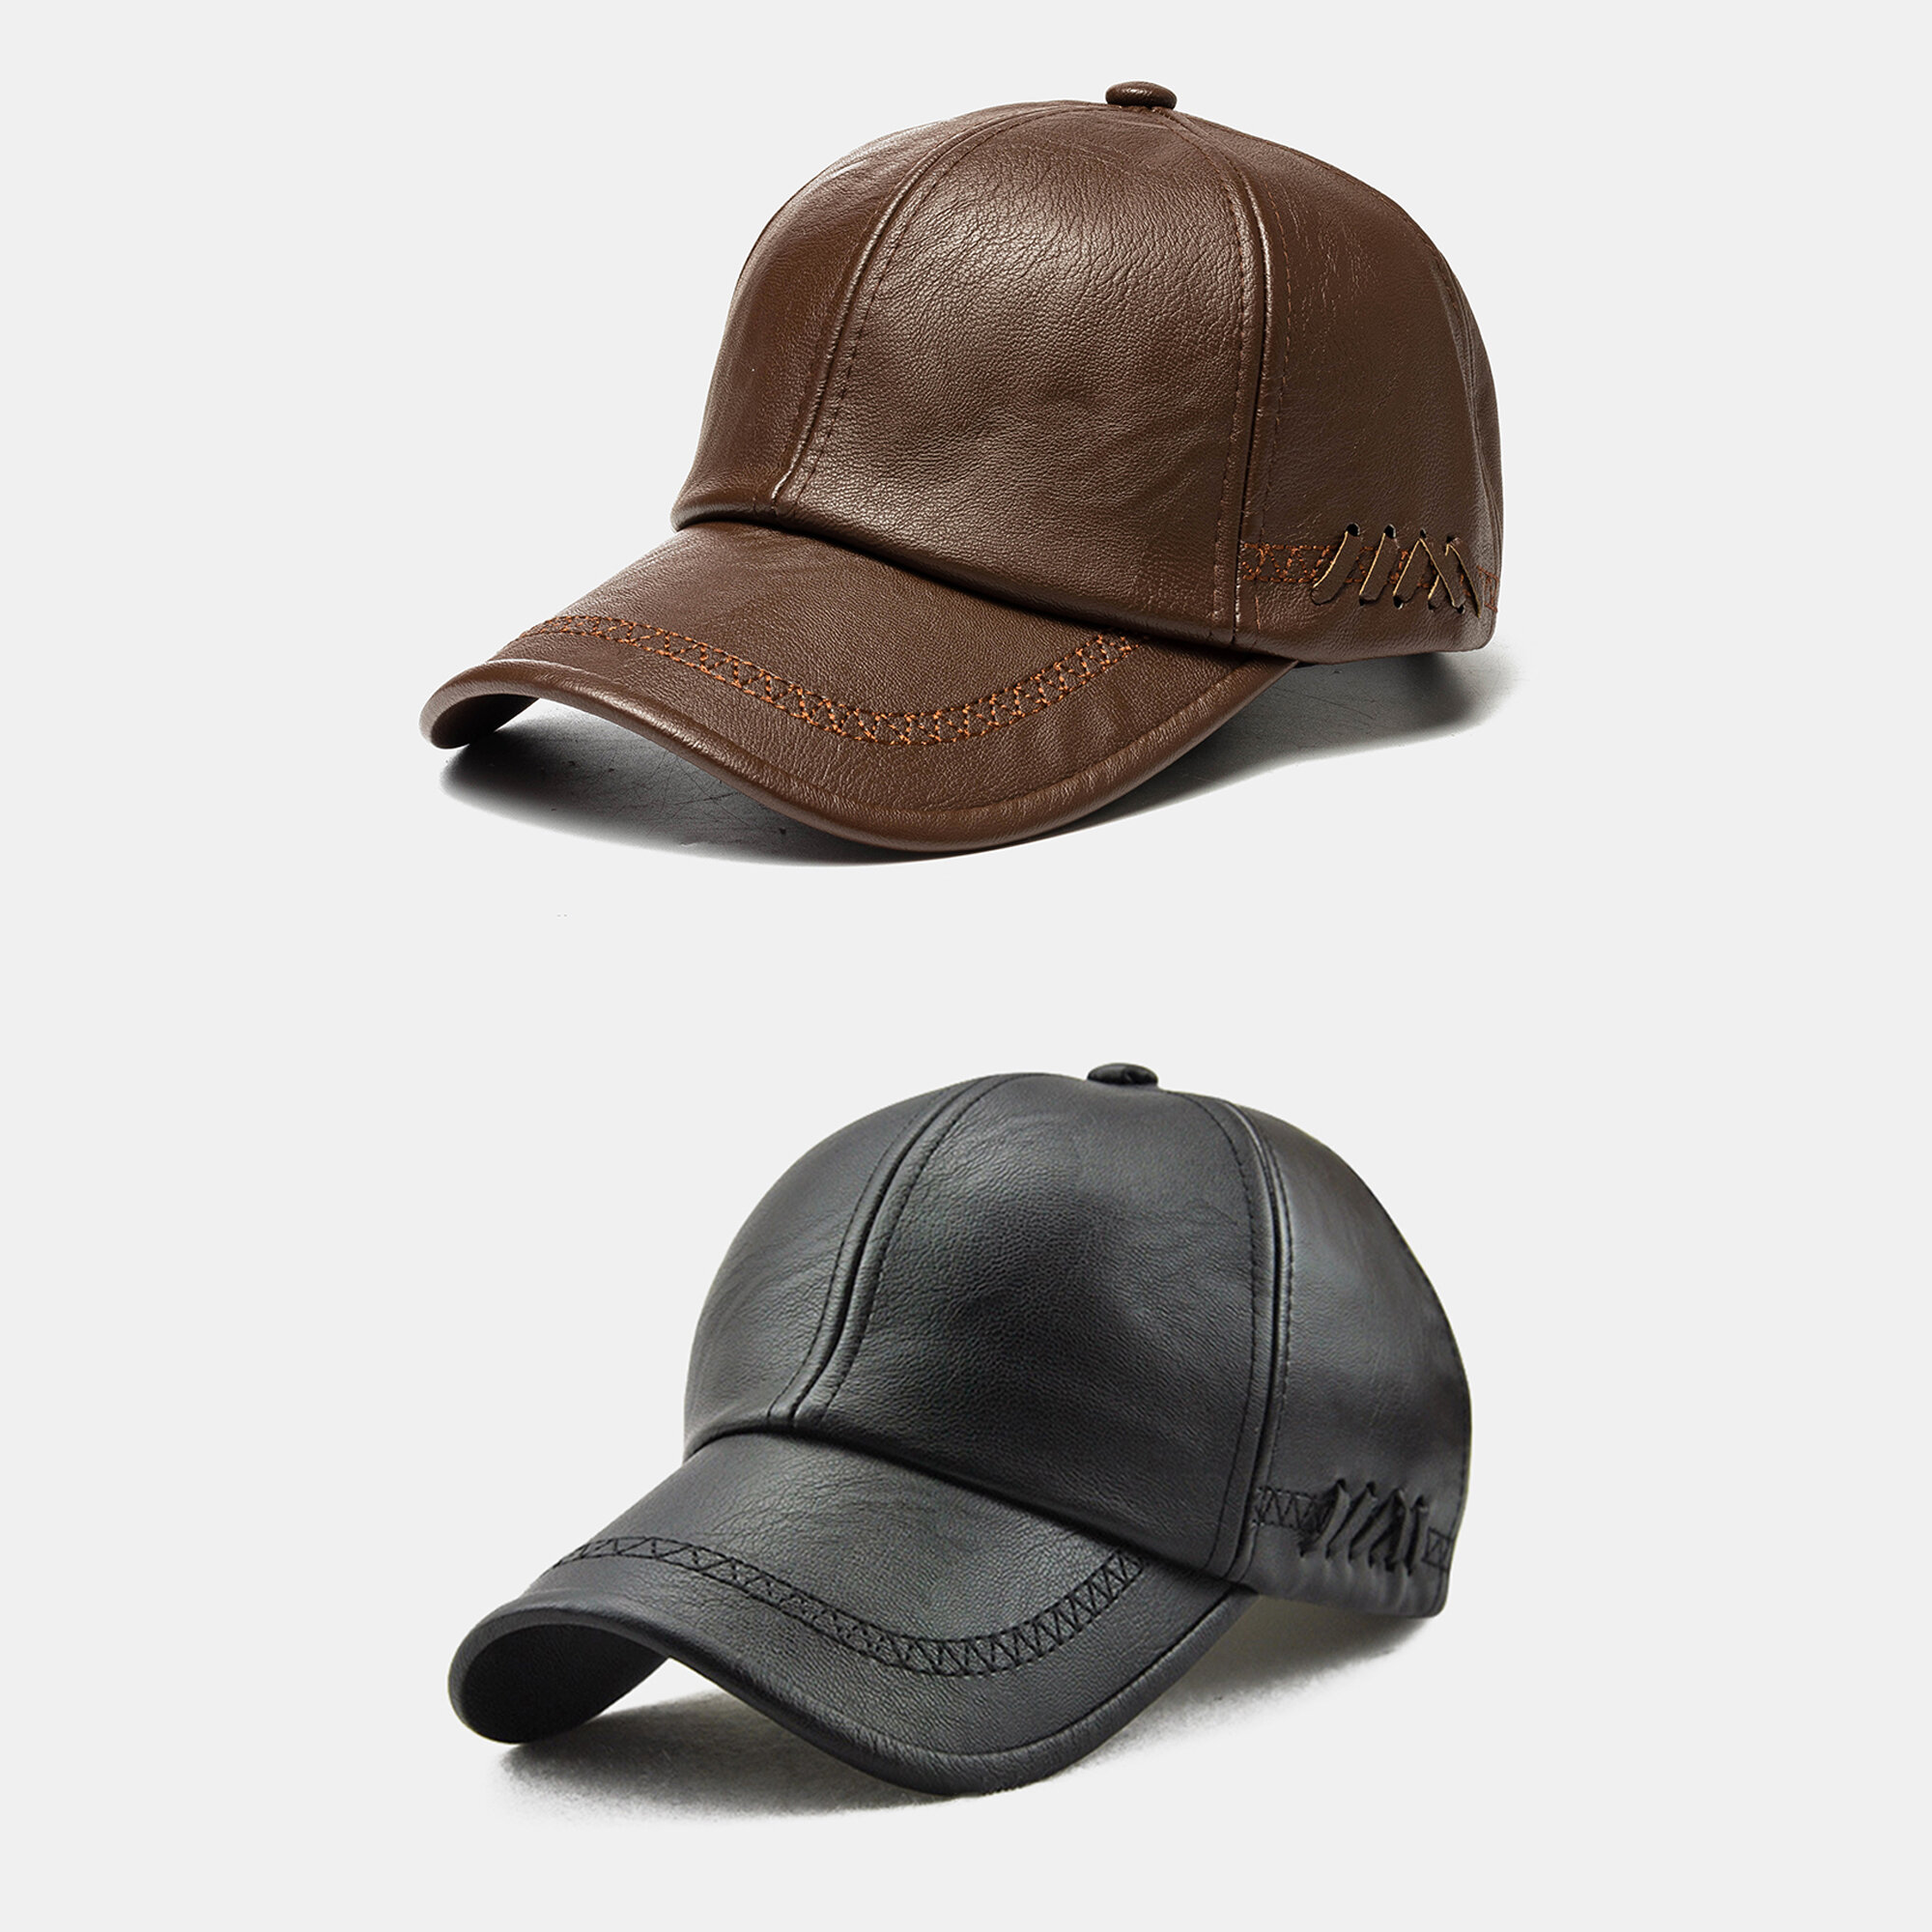 2PCS Collrown Men PU Leather Vintage Casual Personality Soolid Color Baseball Cap With Woven Pattern